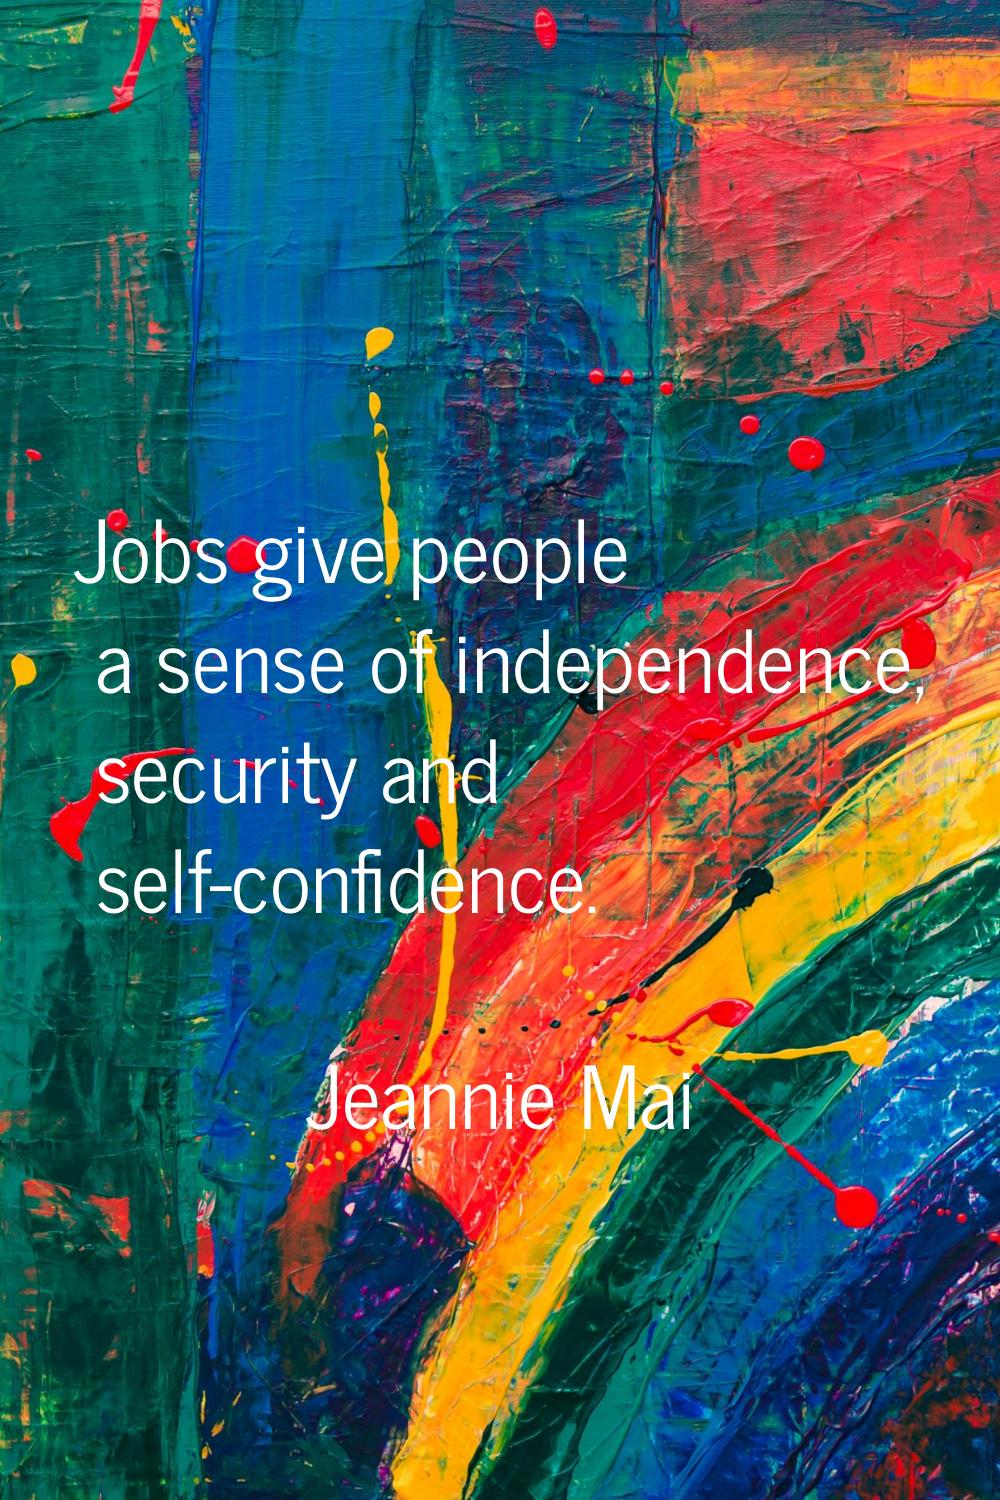 Jobs give people a sense of independence, security and self-confidence.